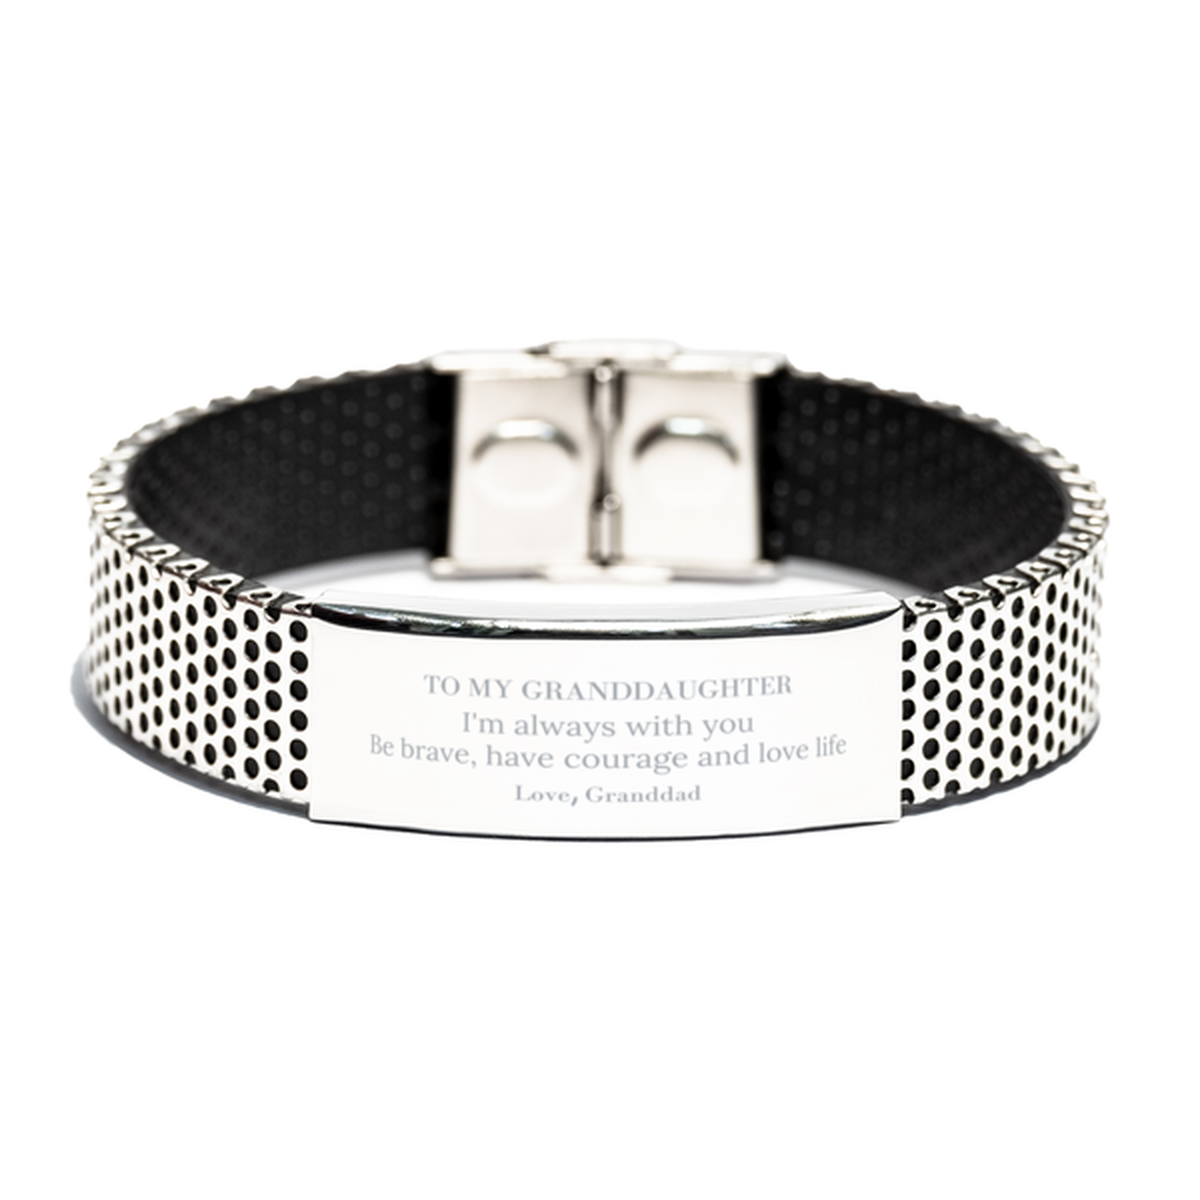 To My Granddaughter Gifts from Granddad, Unique Stainless Steel Bracelet Inspirational Christmas Birthday Graduation Gifts for Granddaughter I'm always with you. Be brave, have courage and love life. Love, Granddad